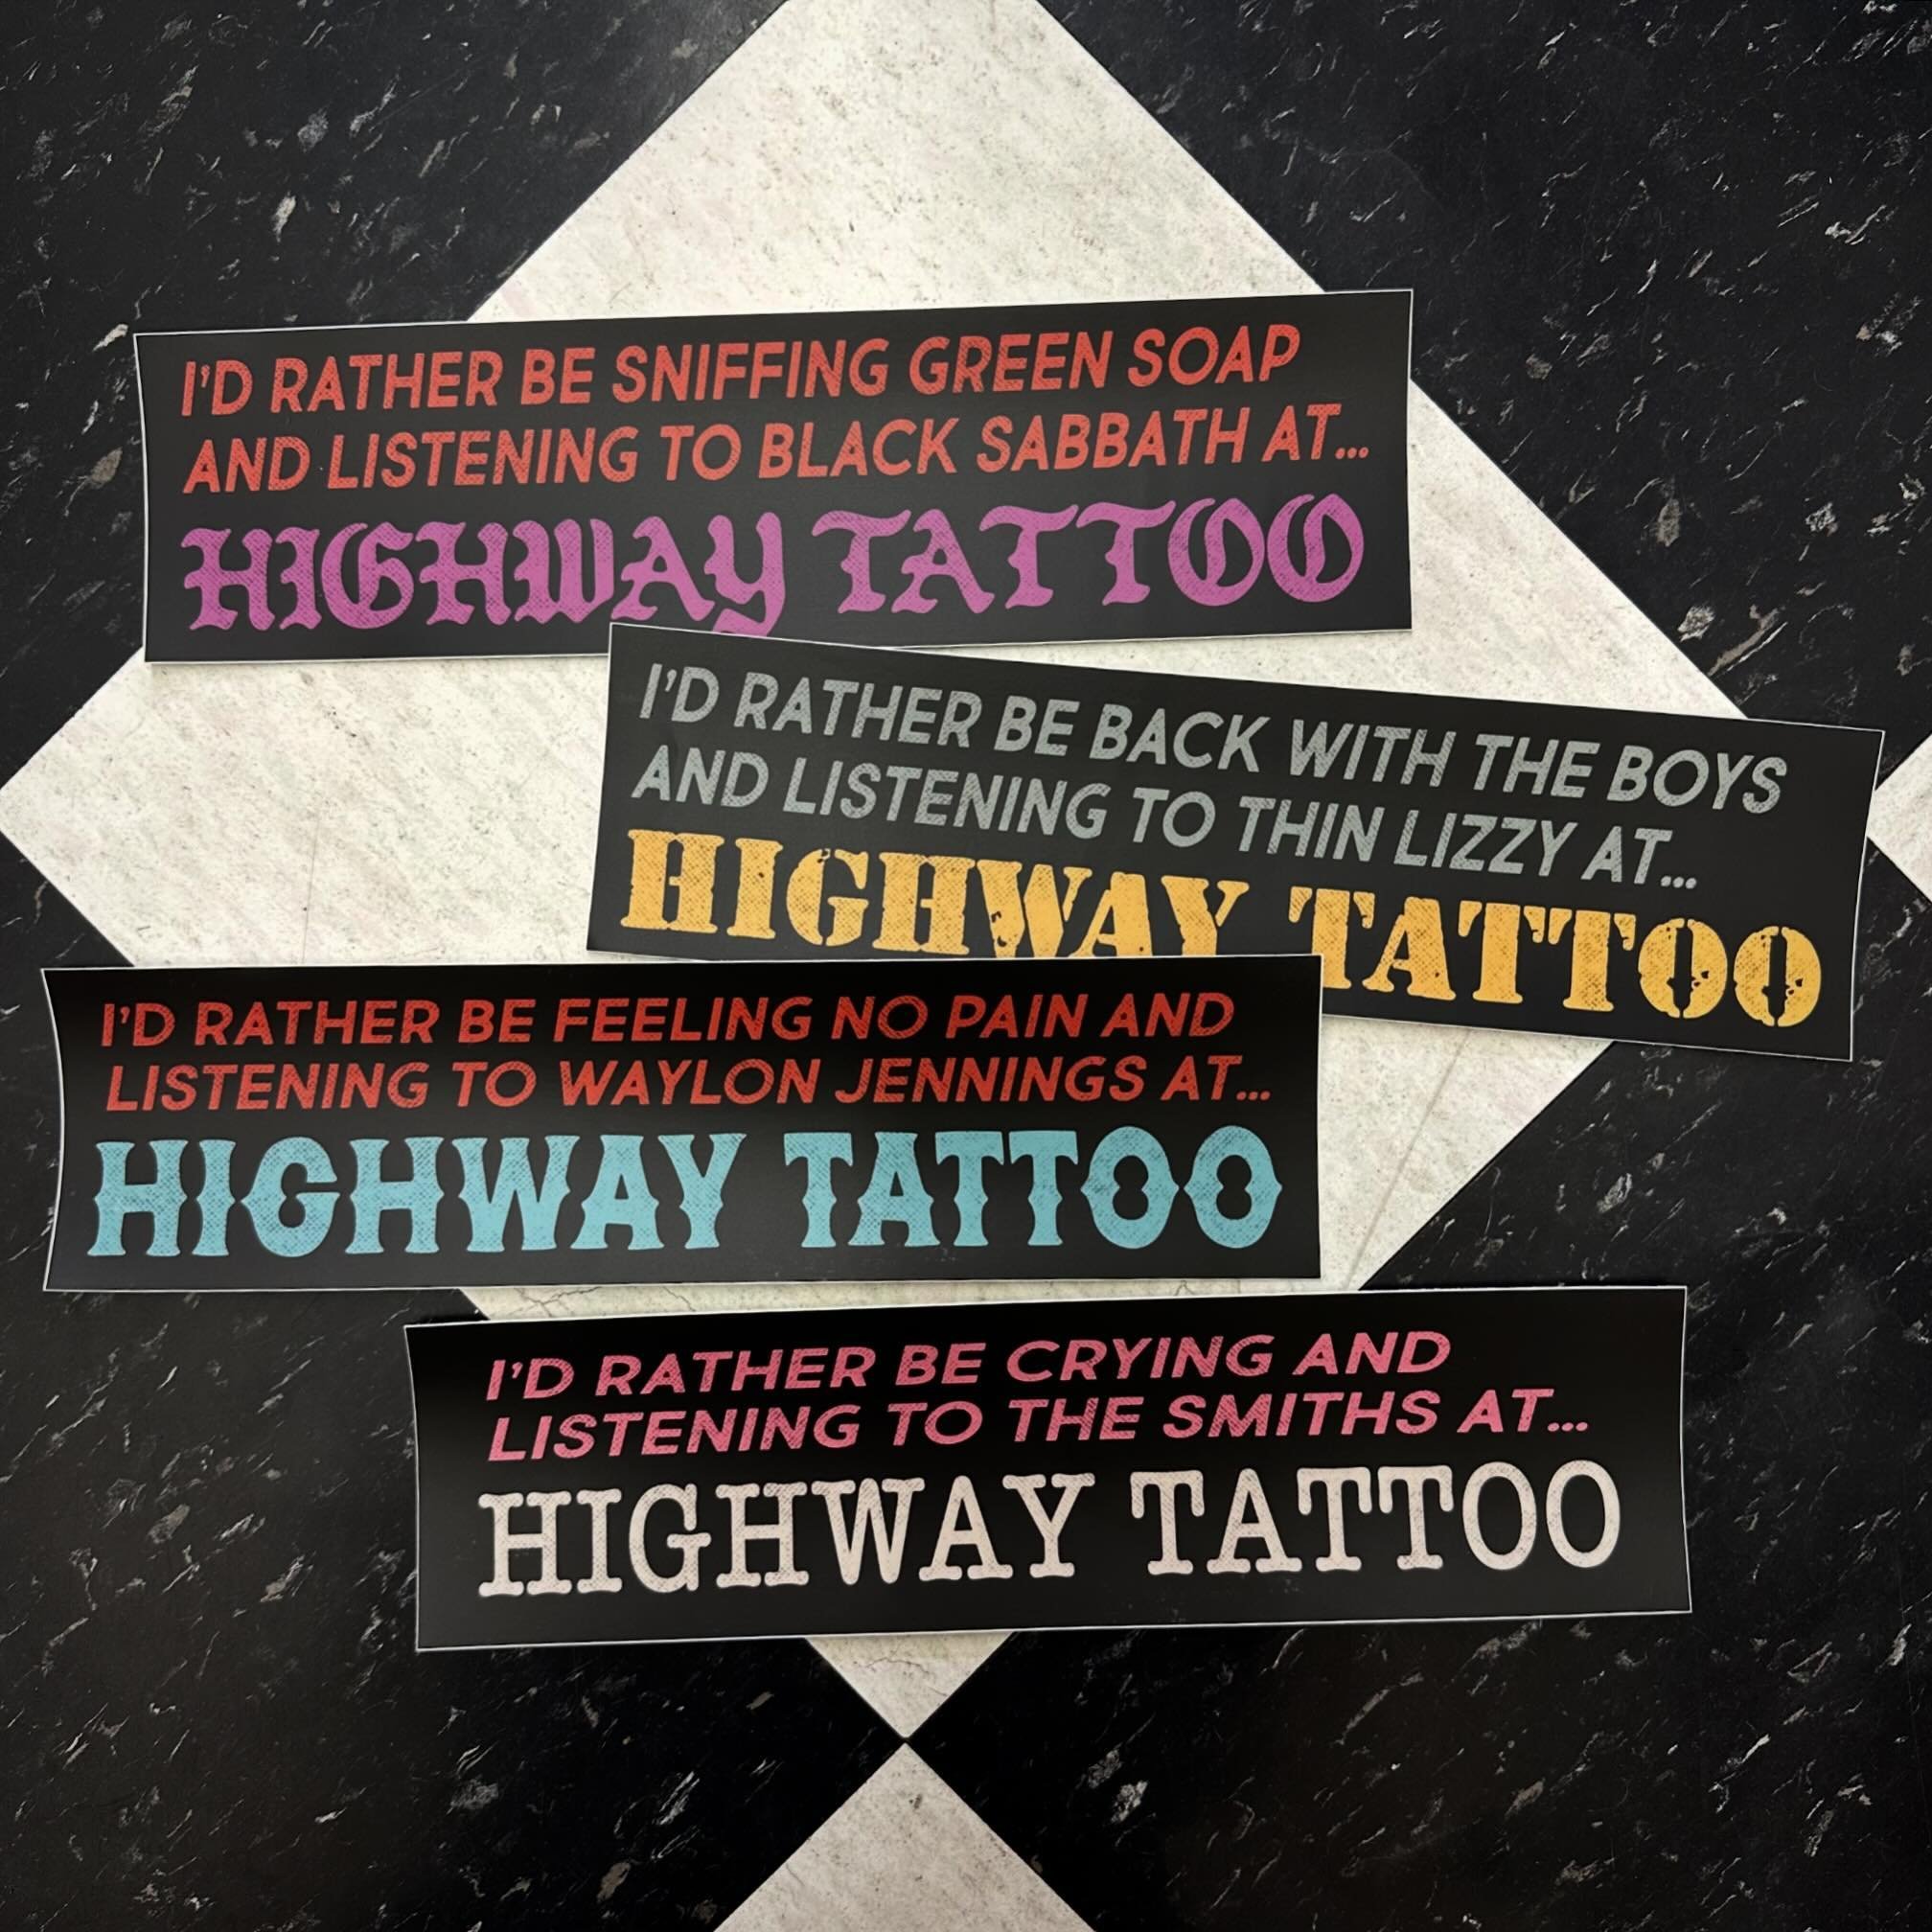 New stickers for your whips. Come and pick one up @highwaytattoo $5